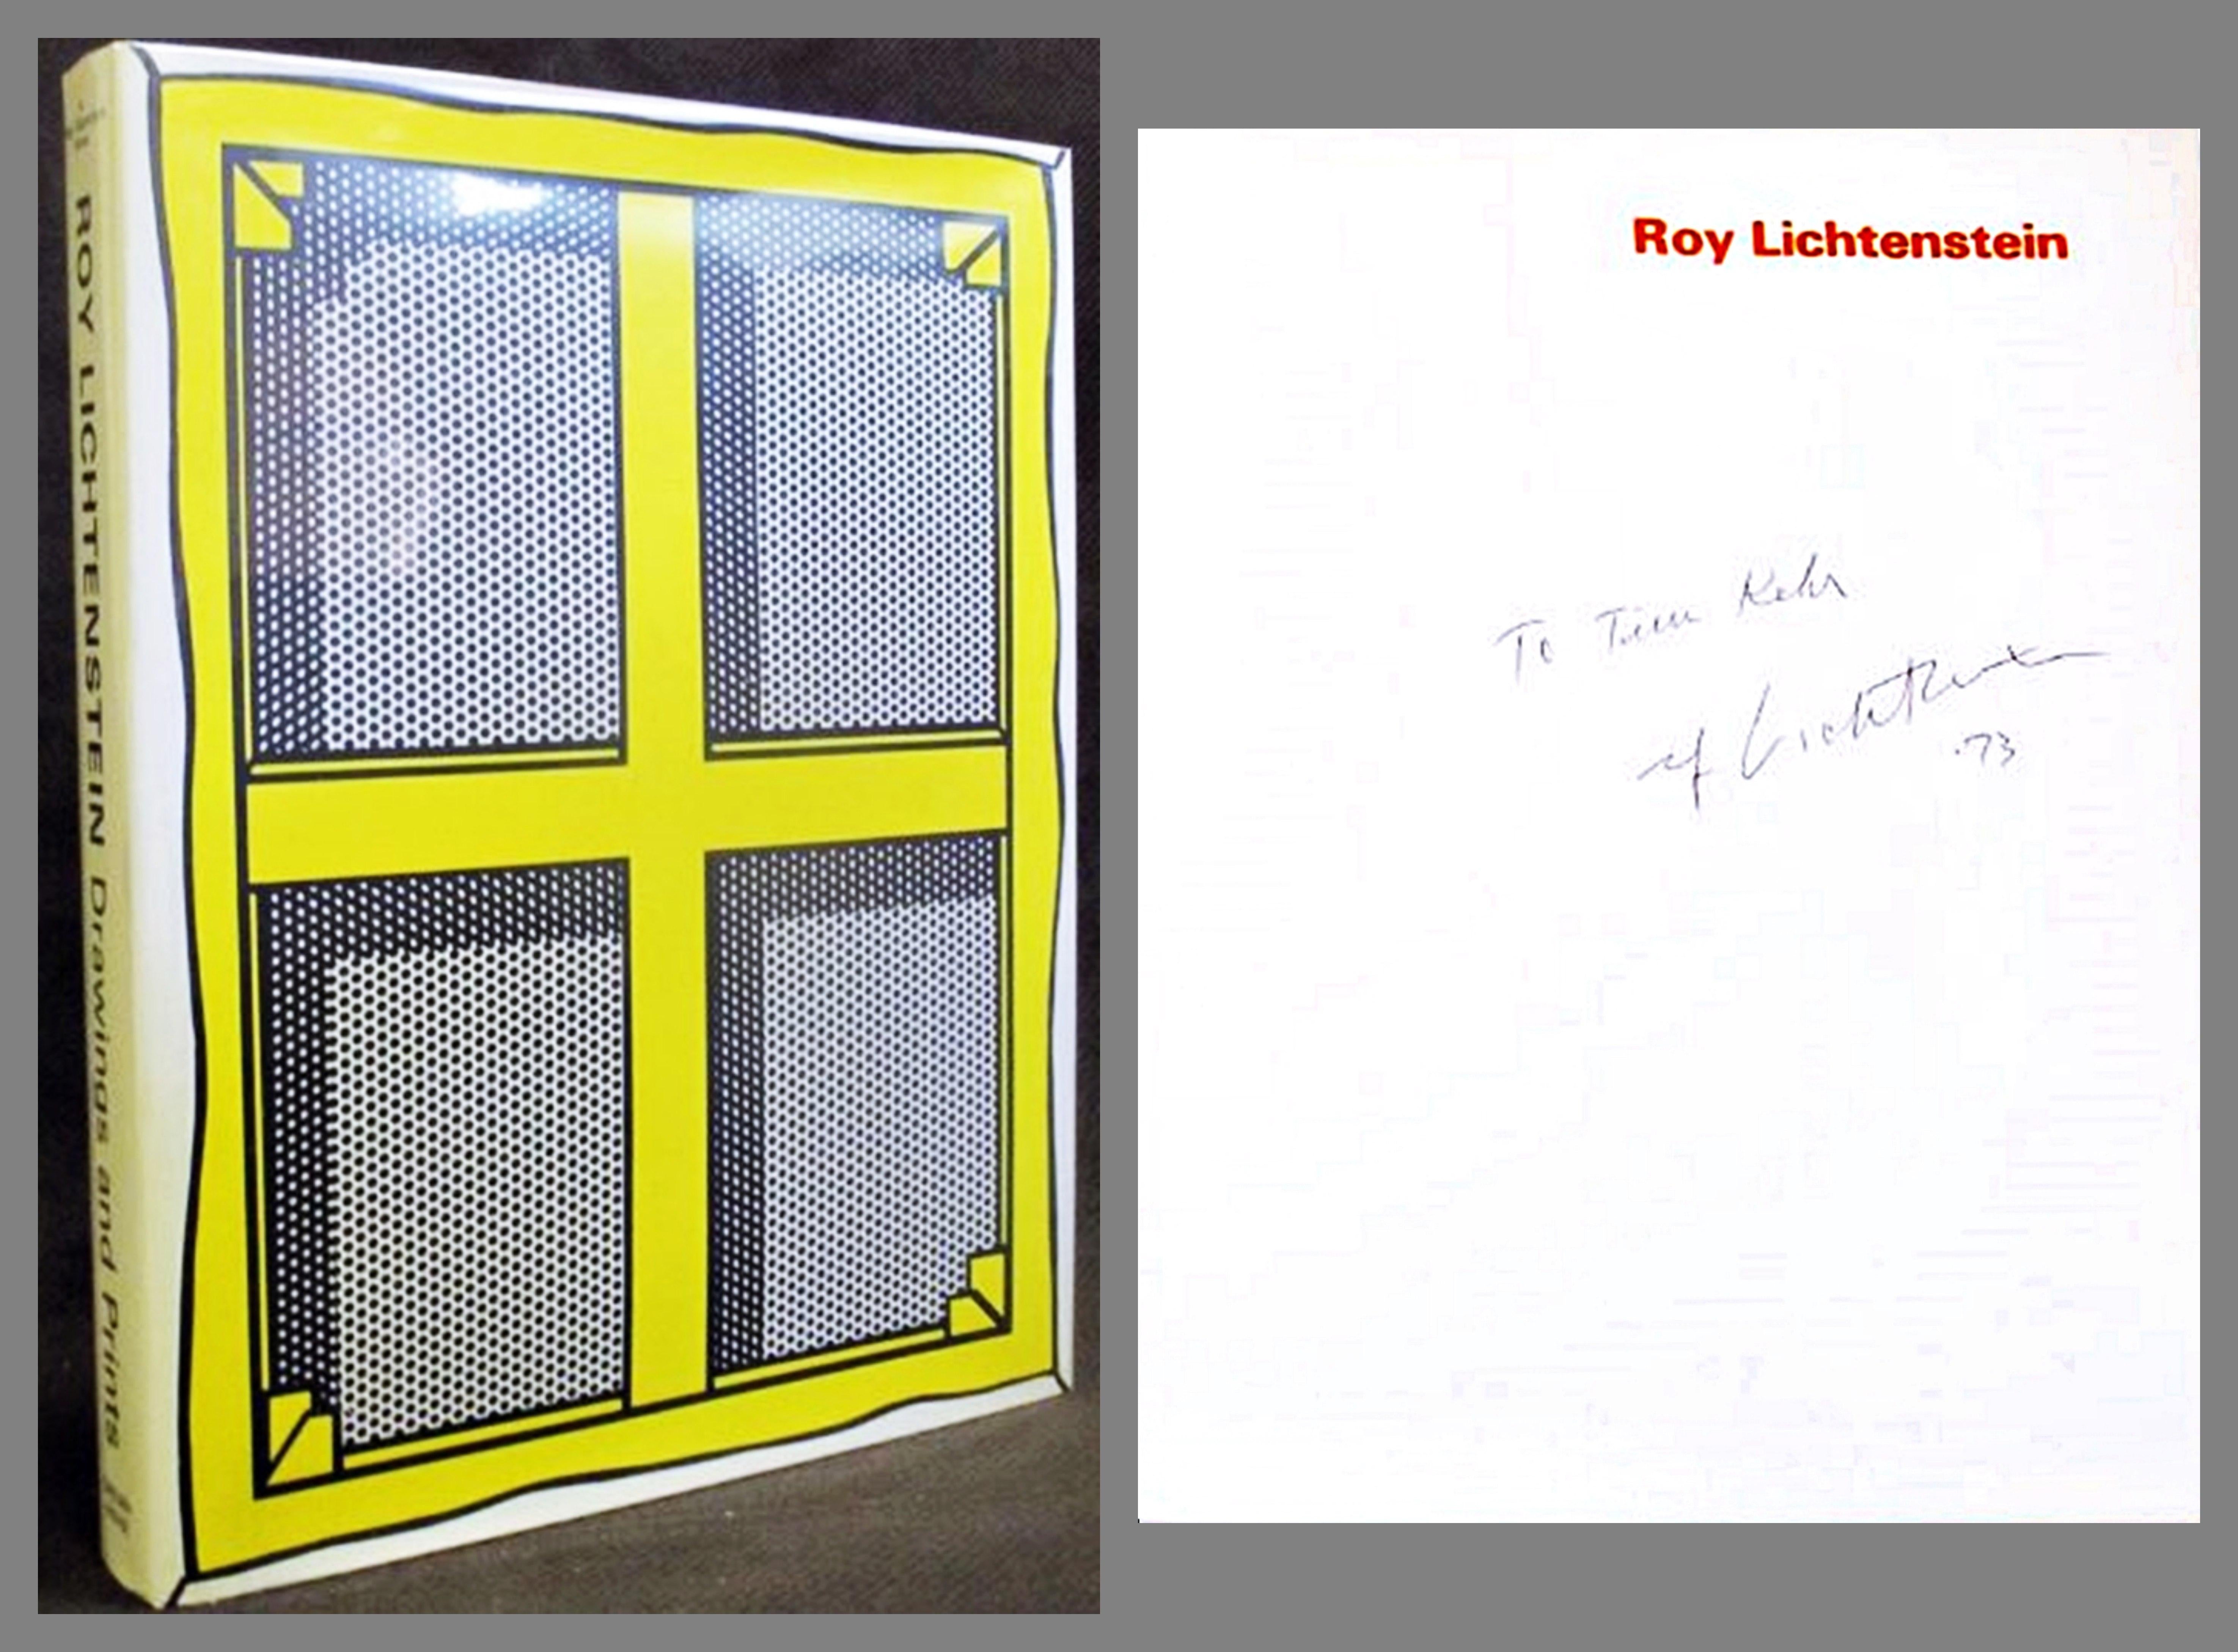 Hardback monograph of drawings and prints hand signed and inscribed by artist - Art by Roy Lichtenstein